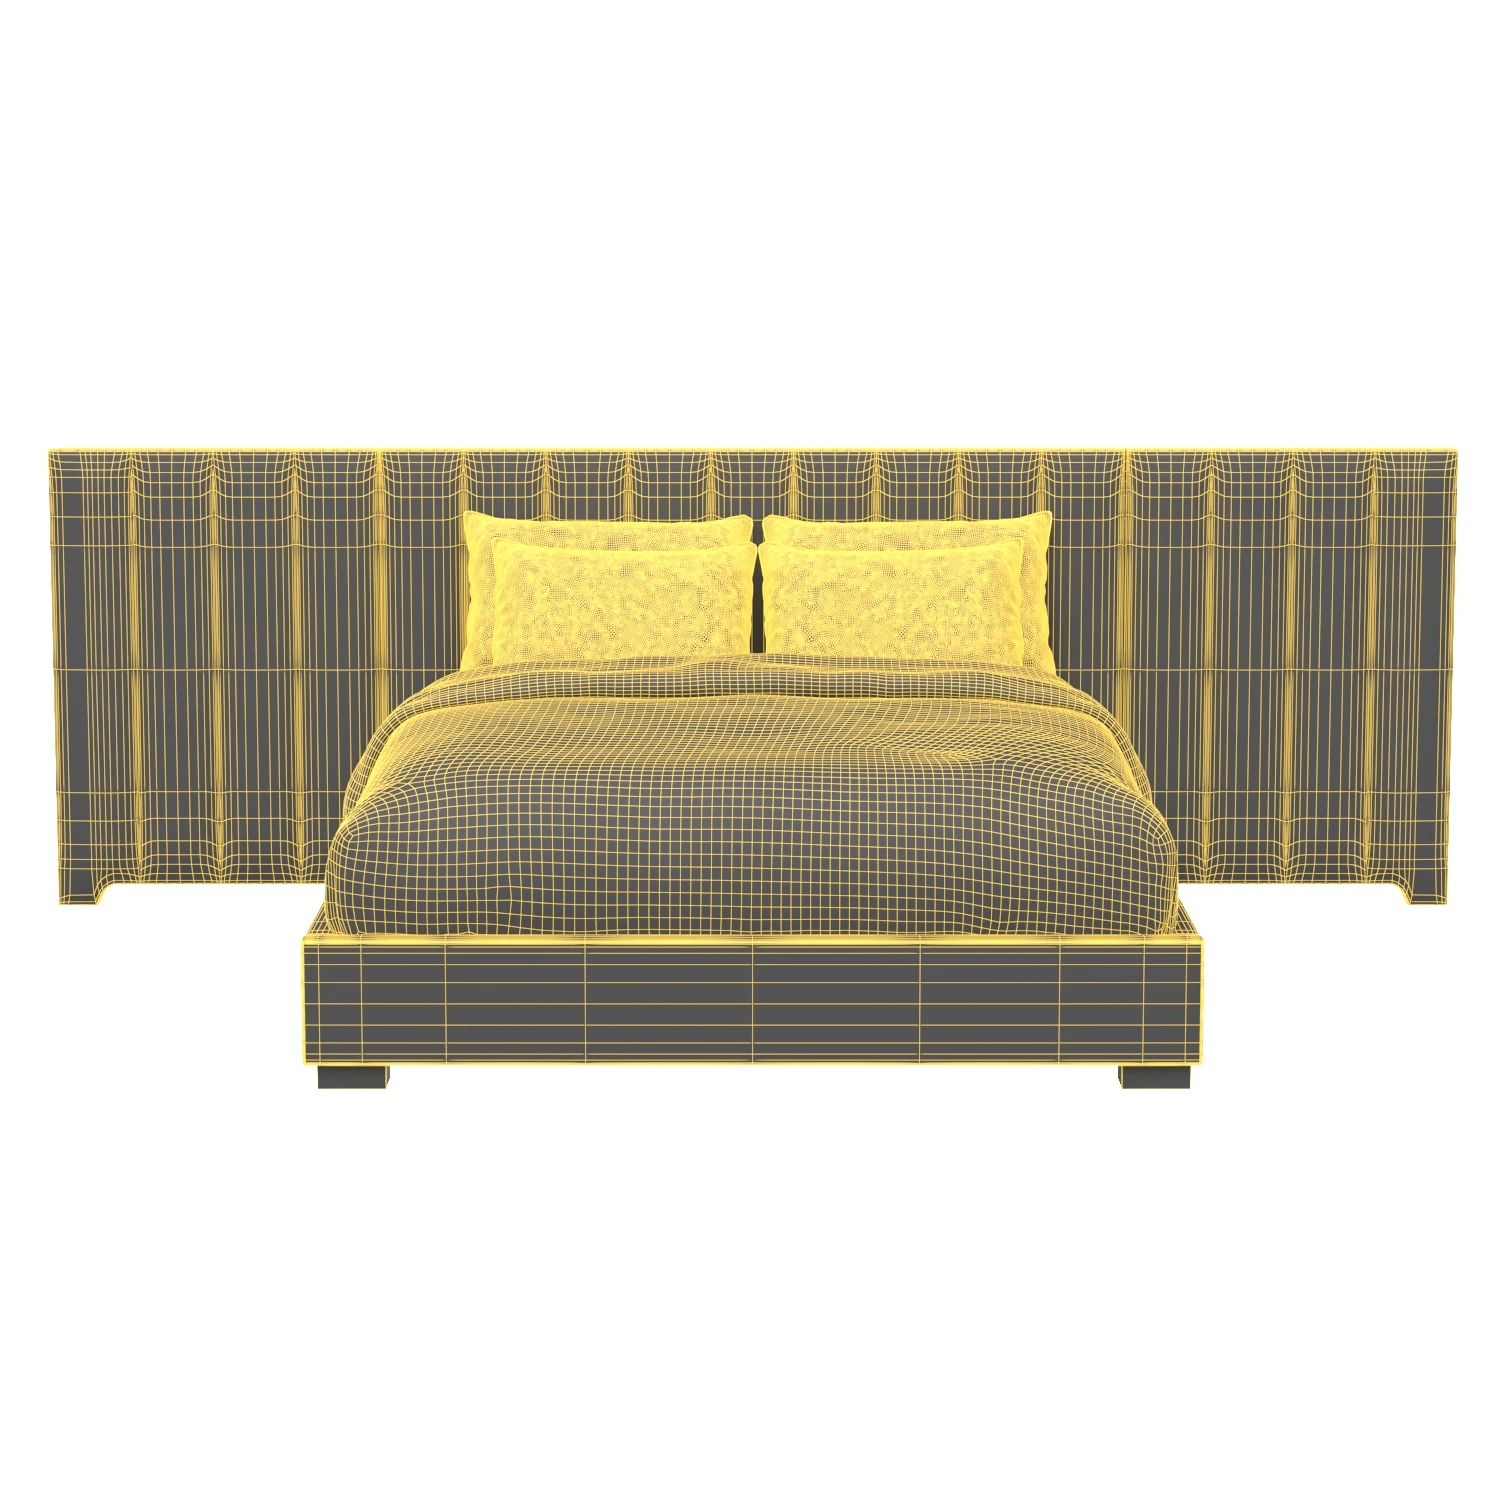 Modern Beds Collection 04 3D Model_012